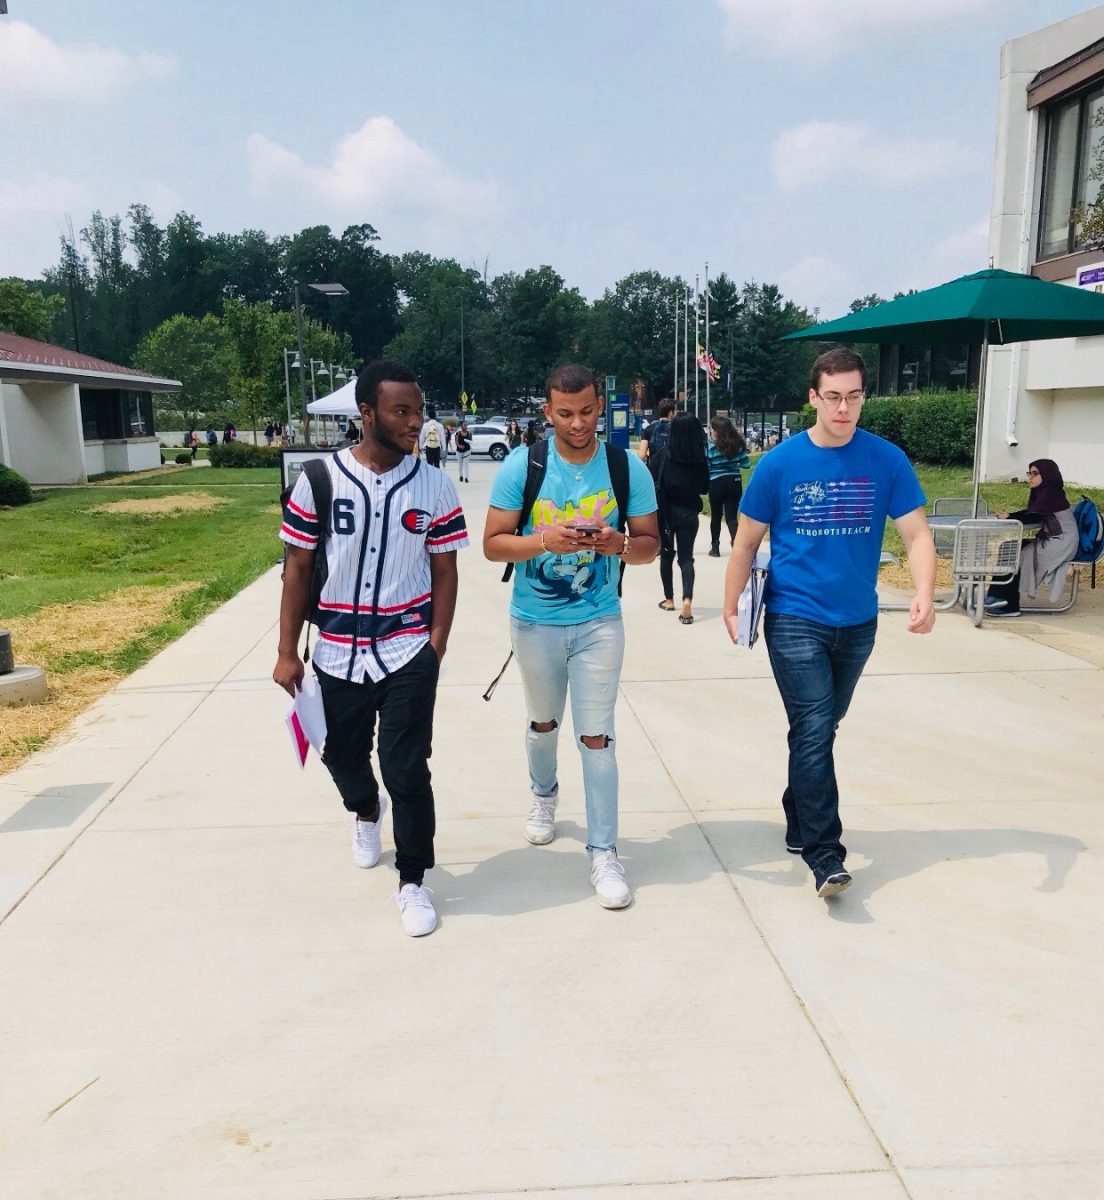 A group of three students walk together.